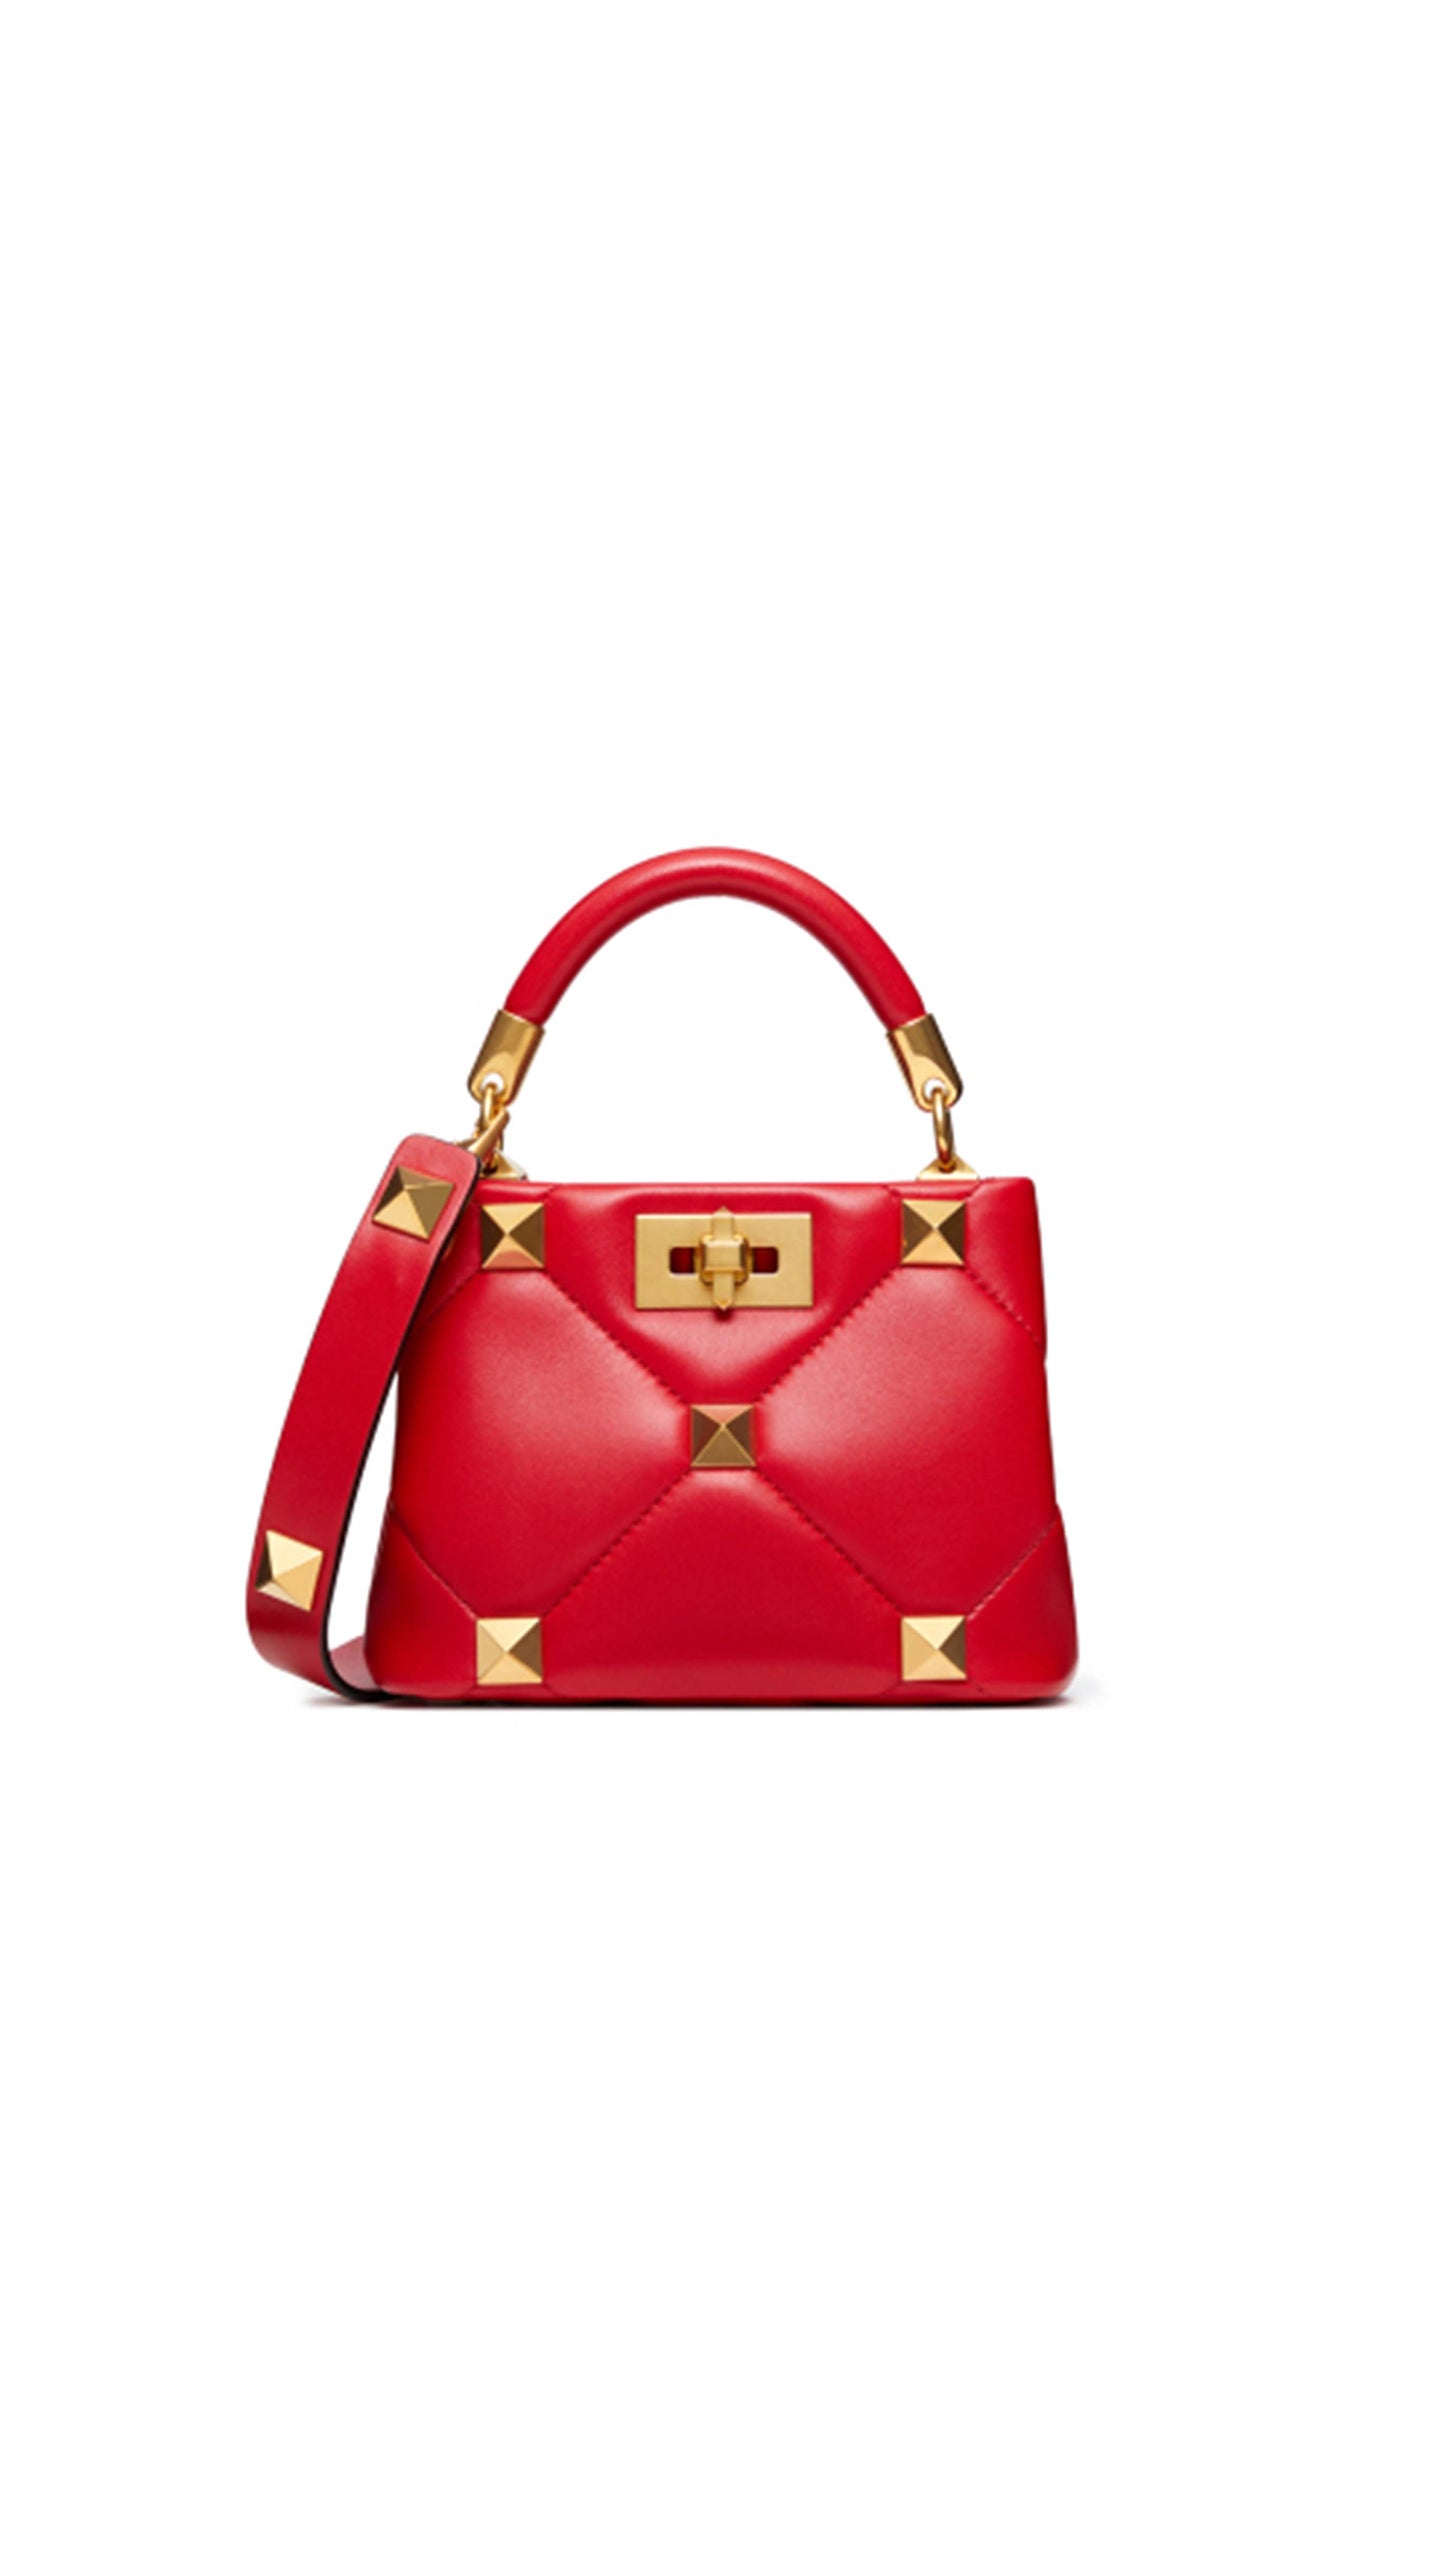 Roman Stud The Handle Bag  520 In Nappa - Red